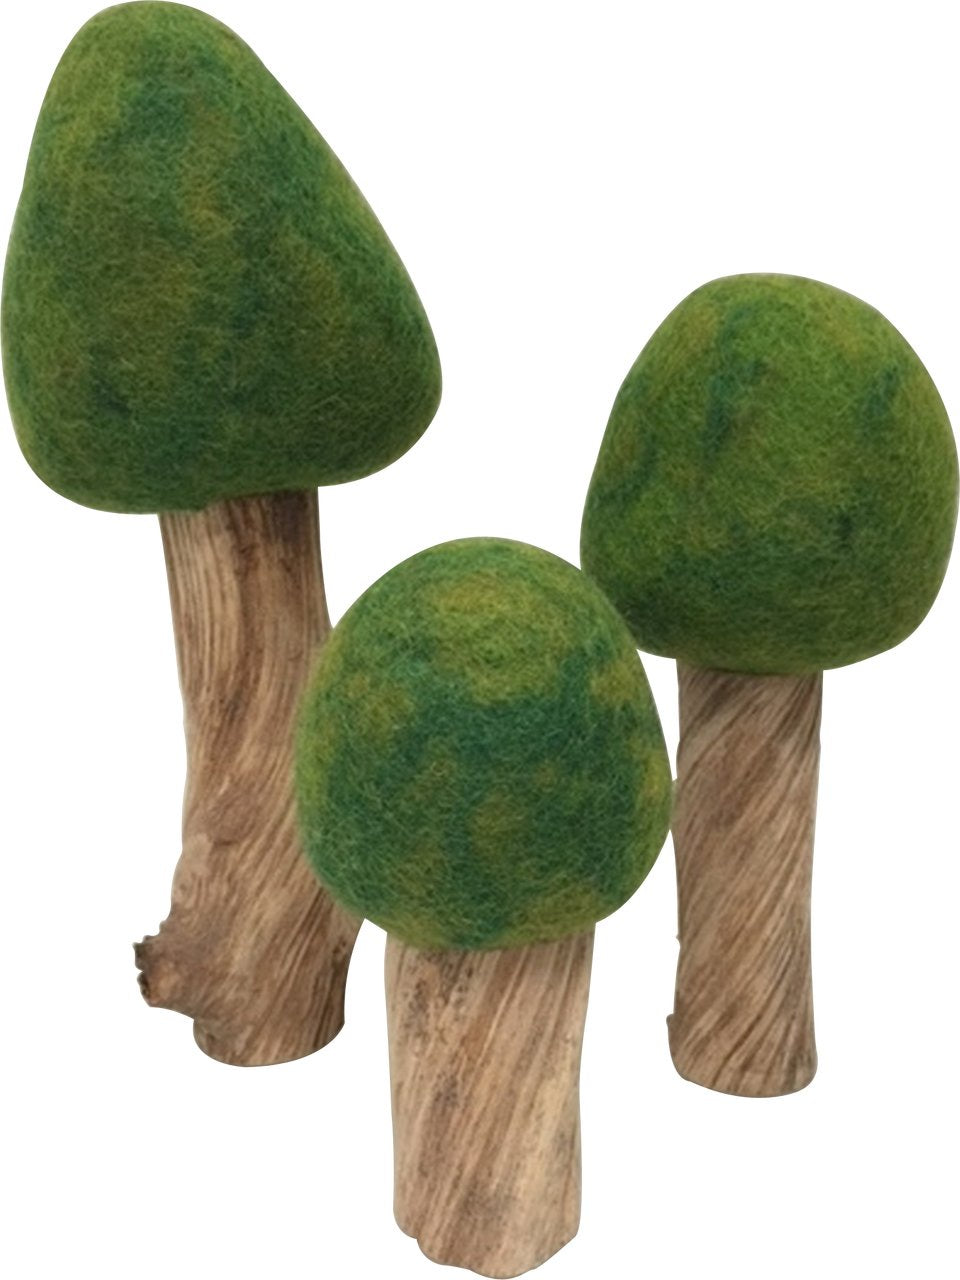 PAPOOSE - Season Trees - Summer Trees Set of 3